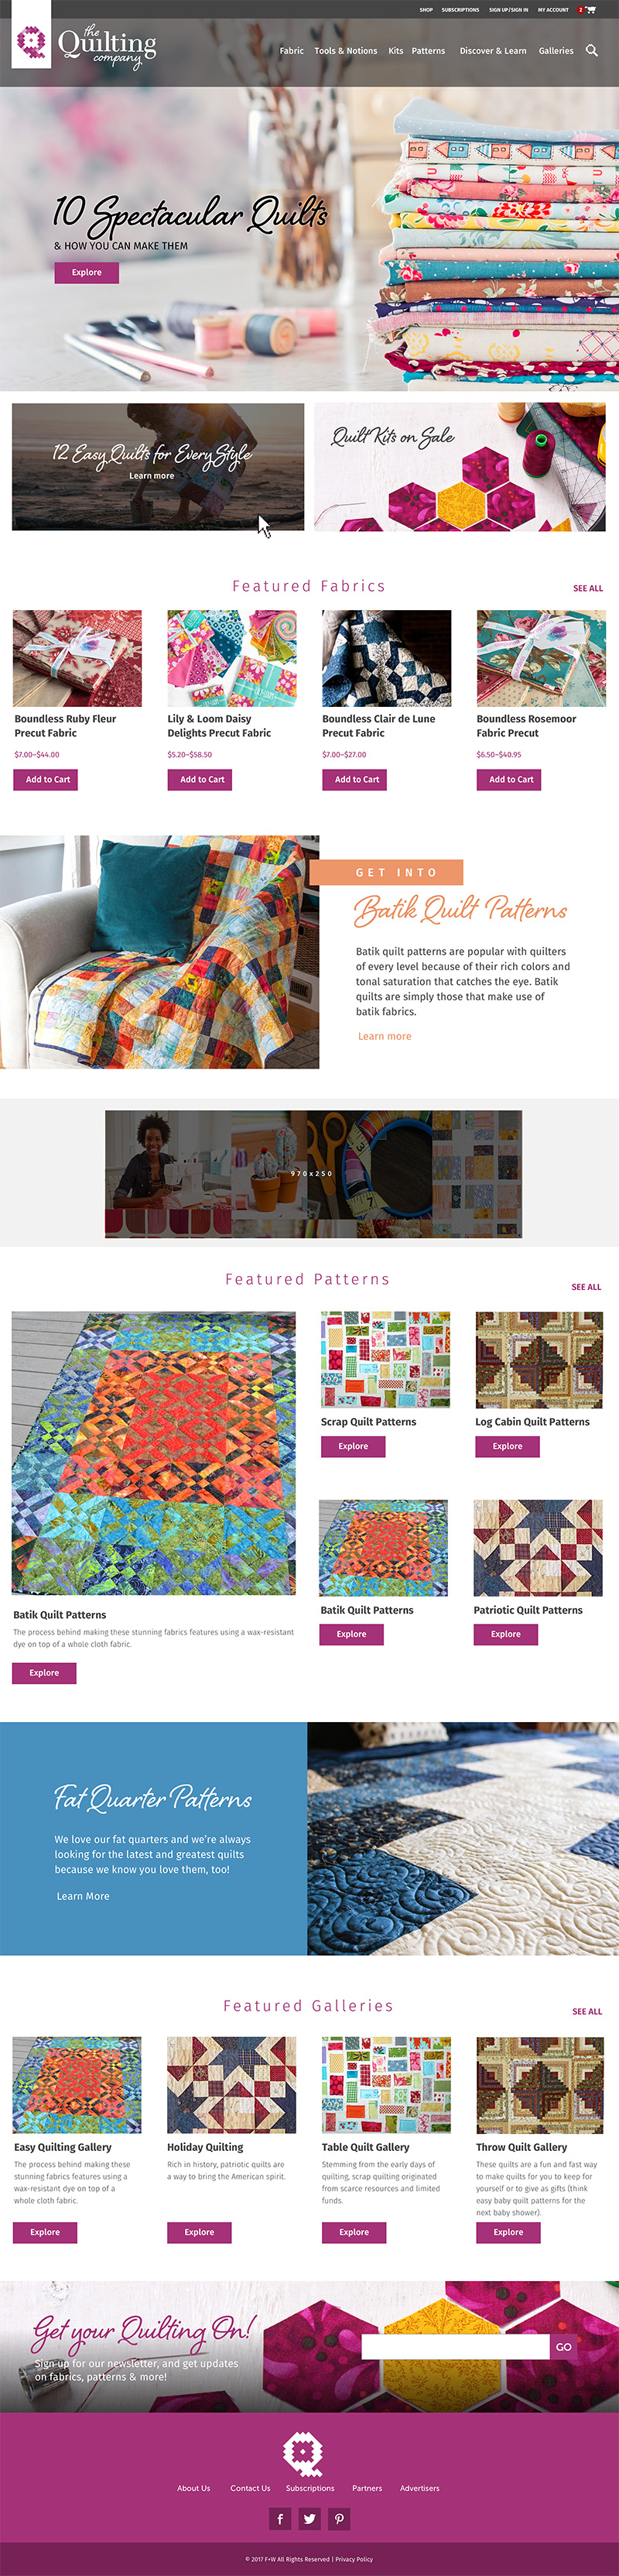 Quilting Homepage